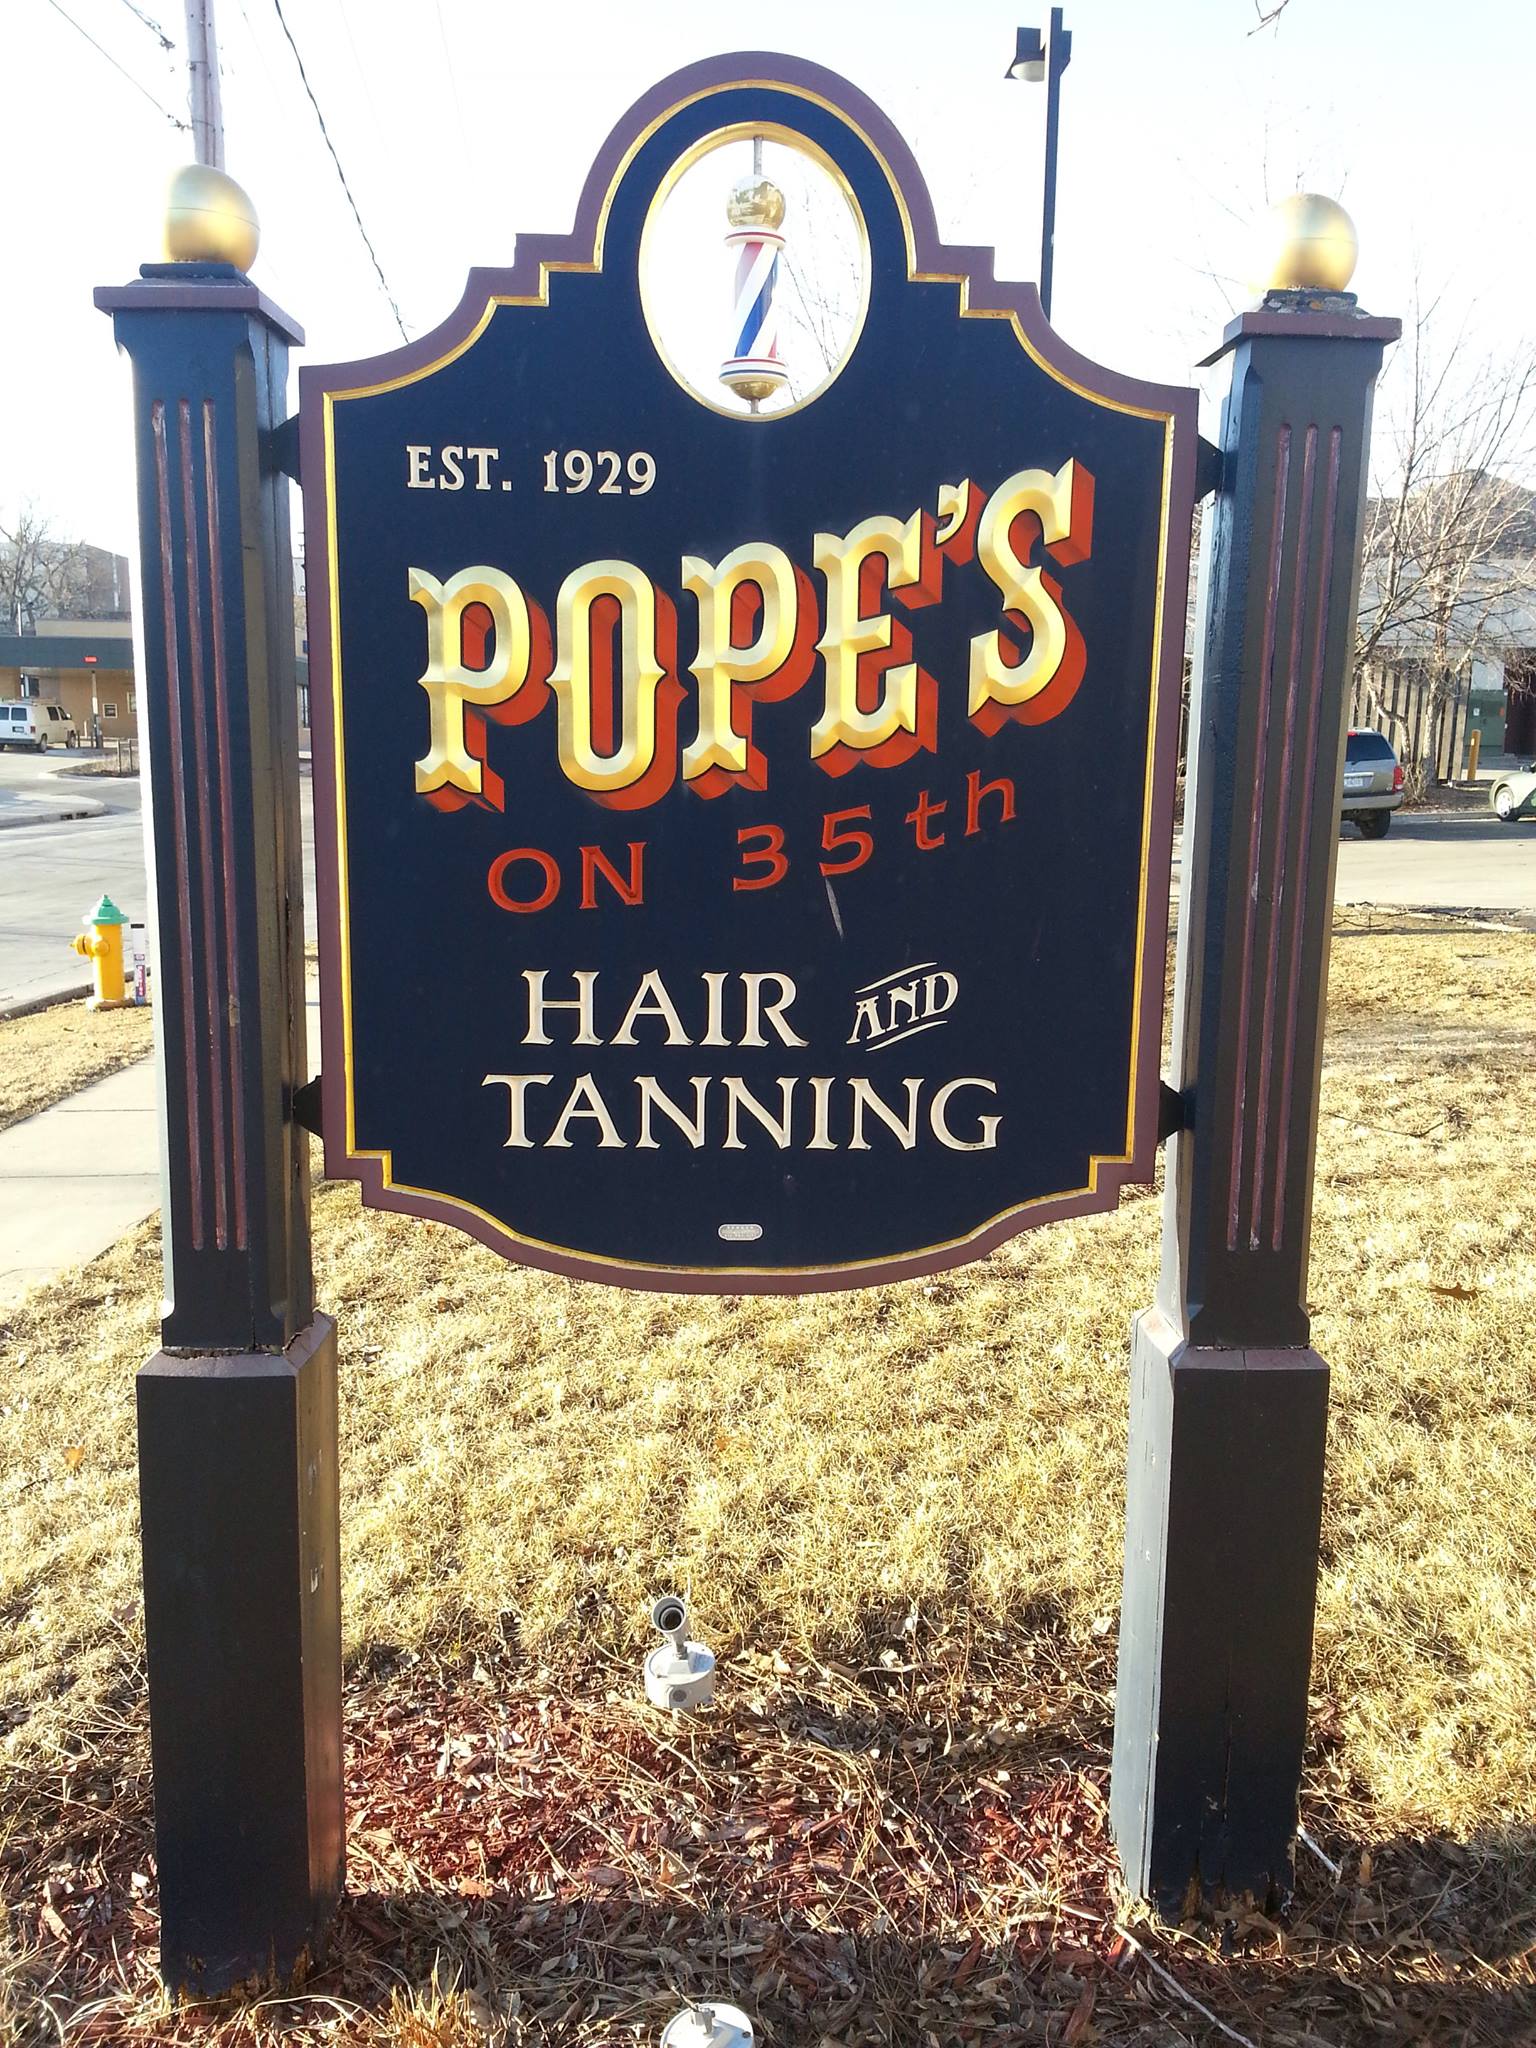 Pope's On 35th Hair & Tanning